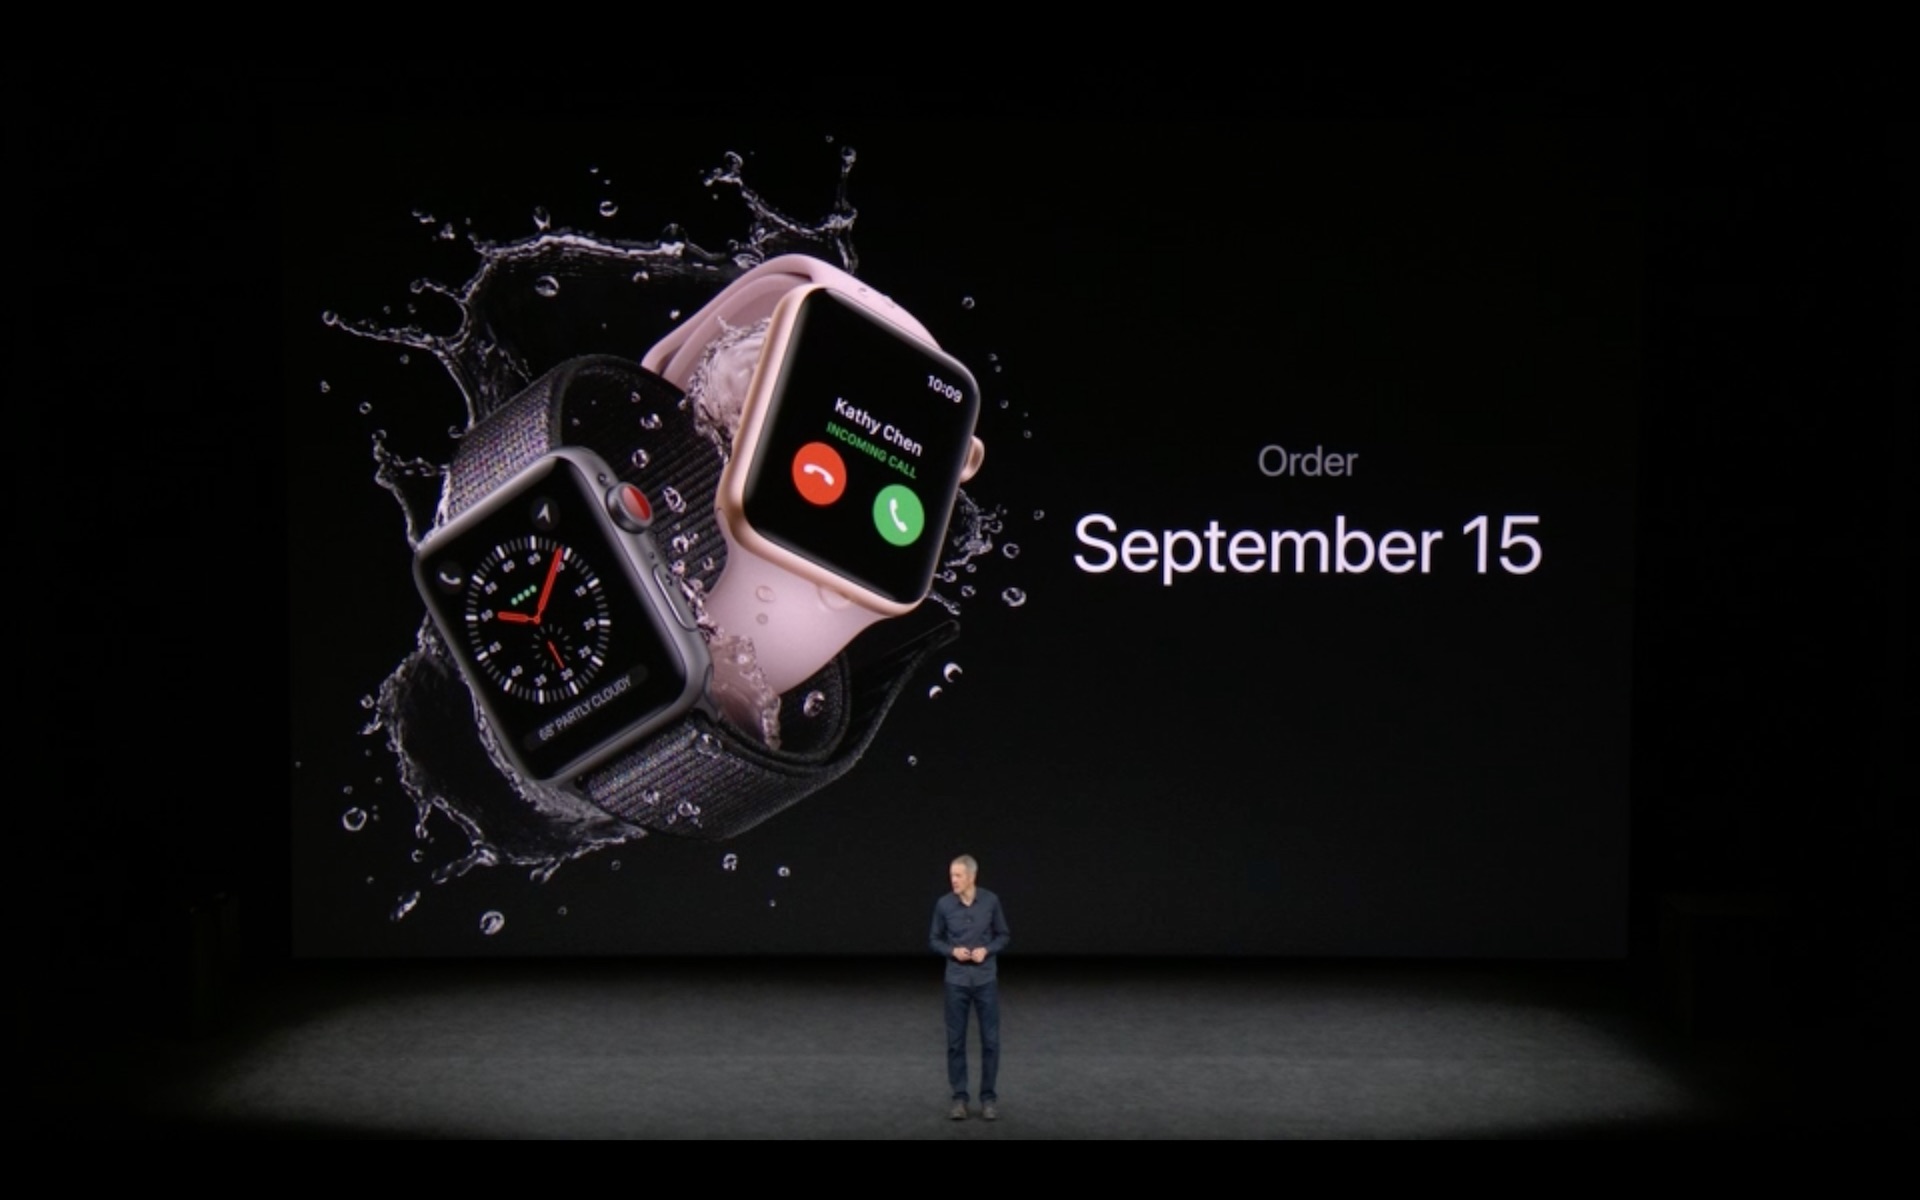 Introducing Apple Watch Series 3: A Dick Tracy Cellular Wristwatch